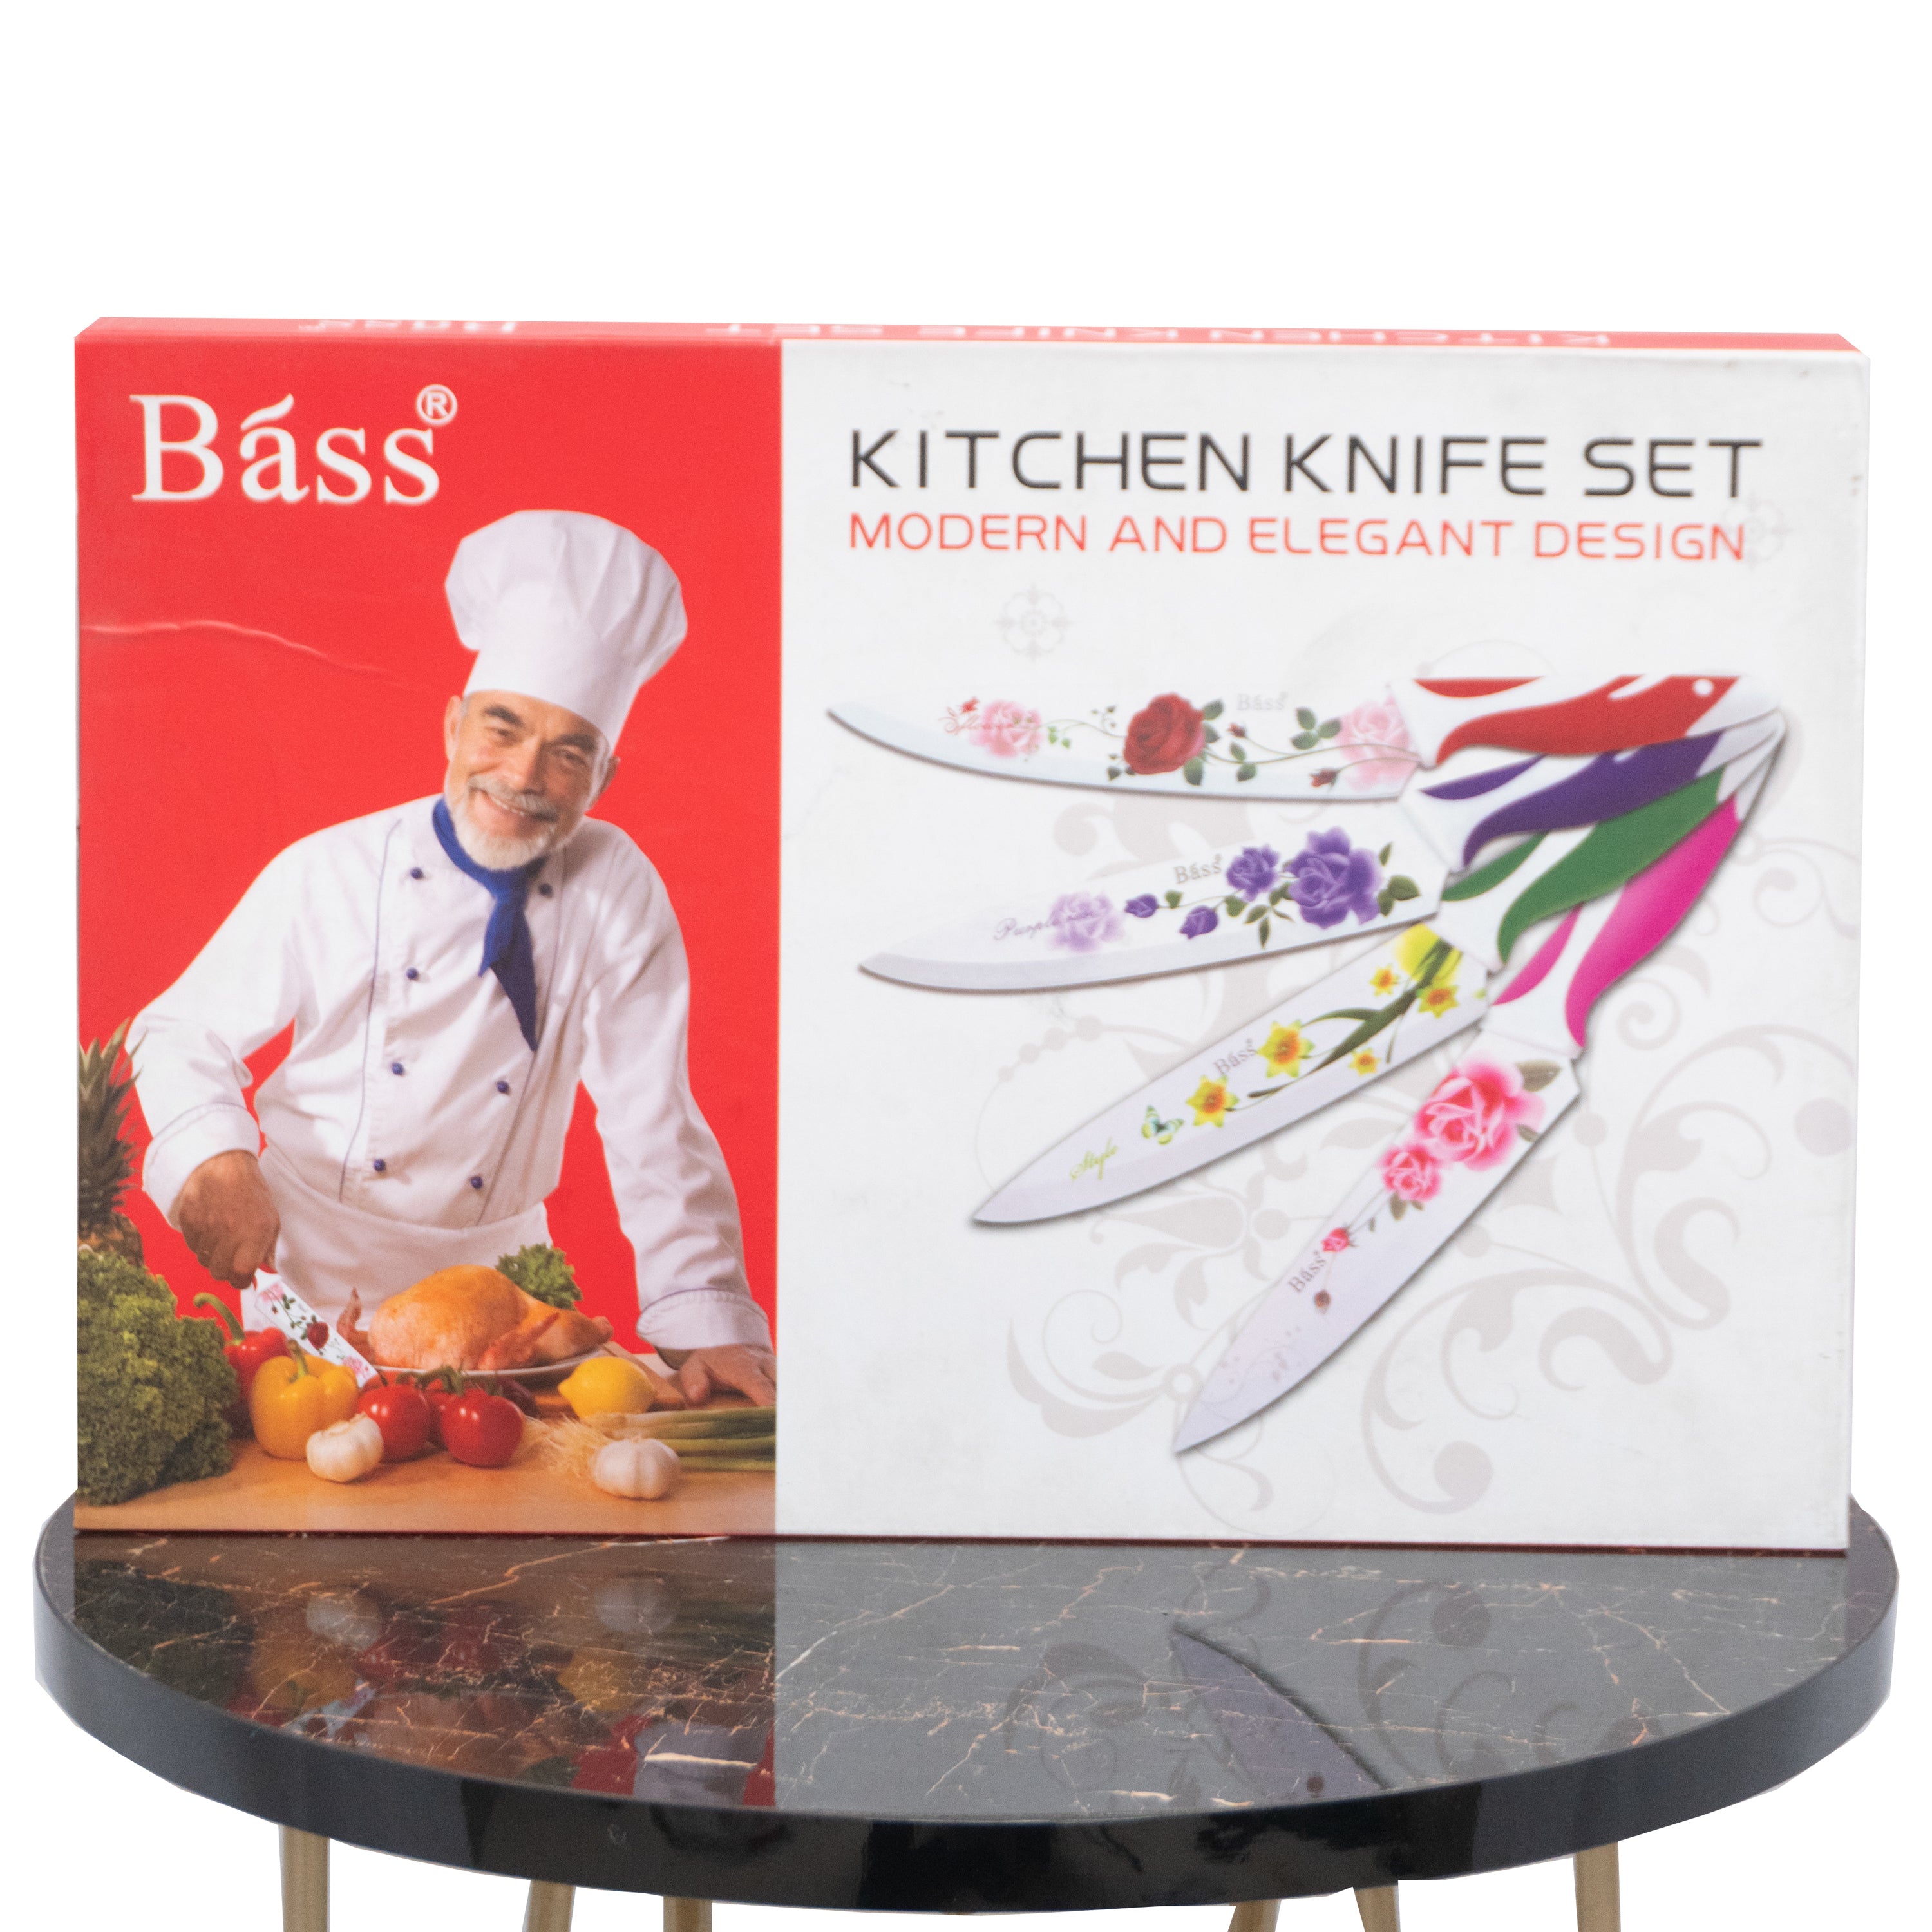 Bass Stainless Steel 6-Piece Knife Set - Essential Culinary Knife Collection